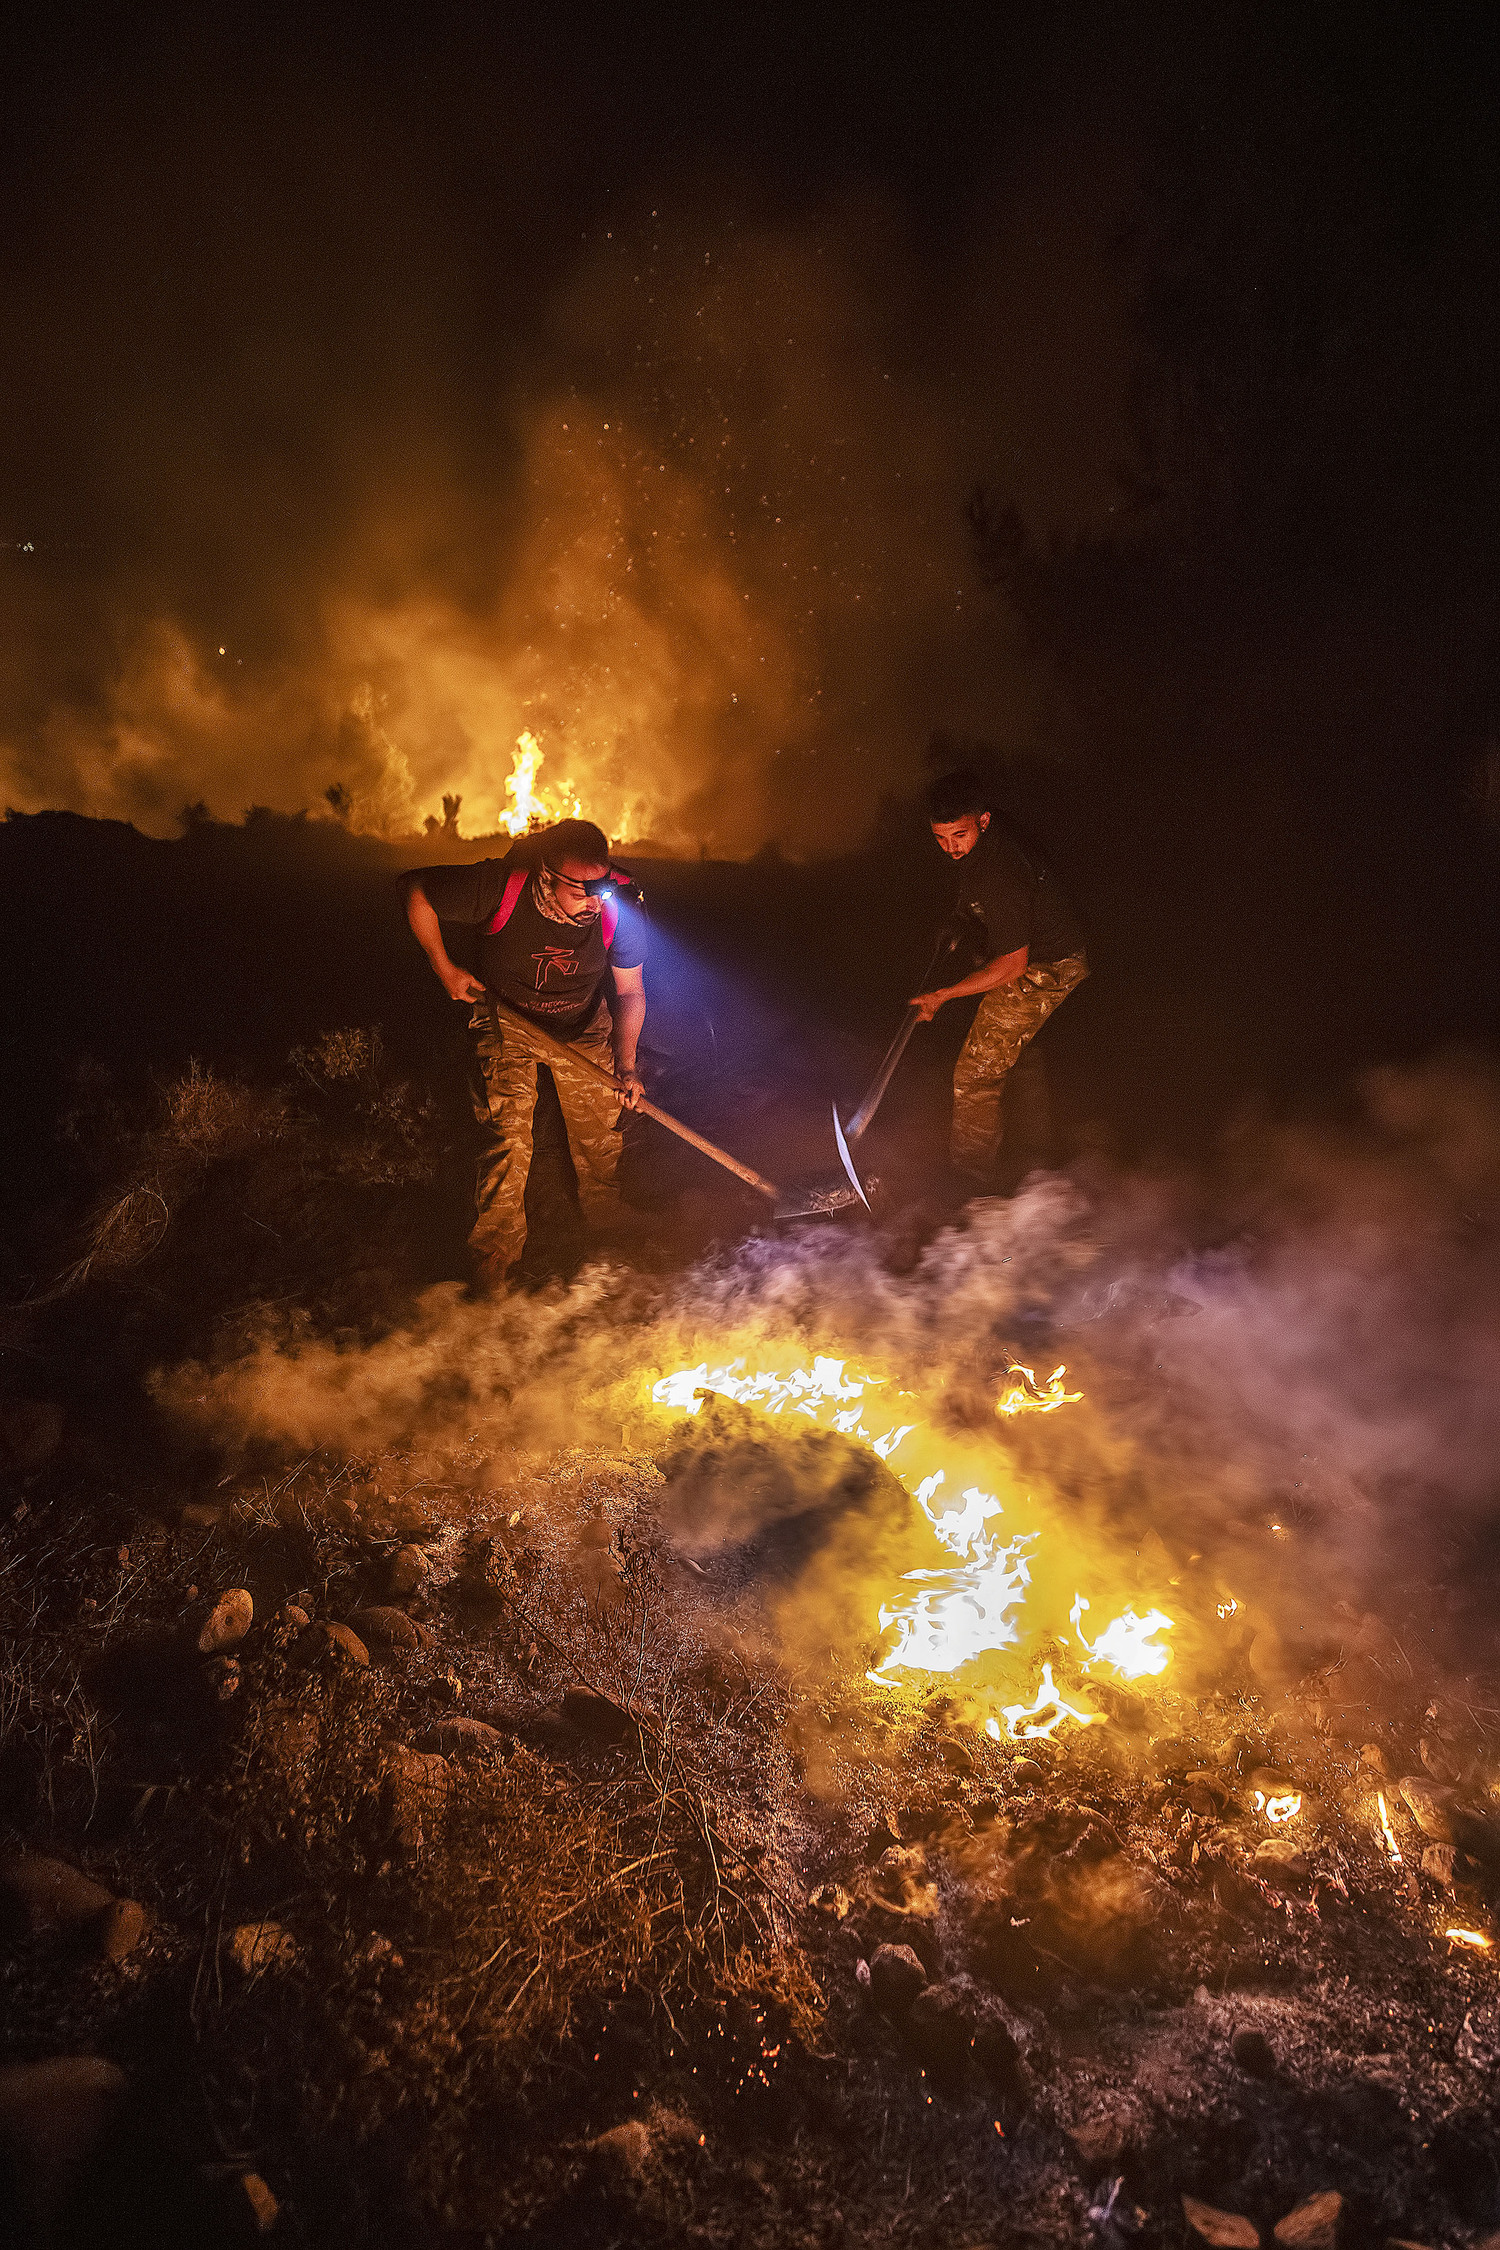 Firefighting efforts have been complicated by strong winds, an often short-handed municipal fire service, and the lack of a central organizing system for volunteers who are eager to help.